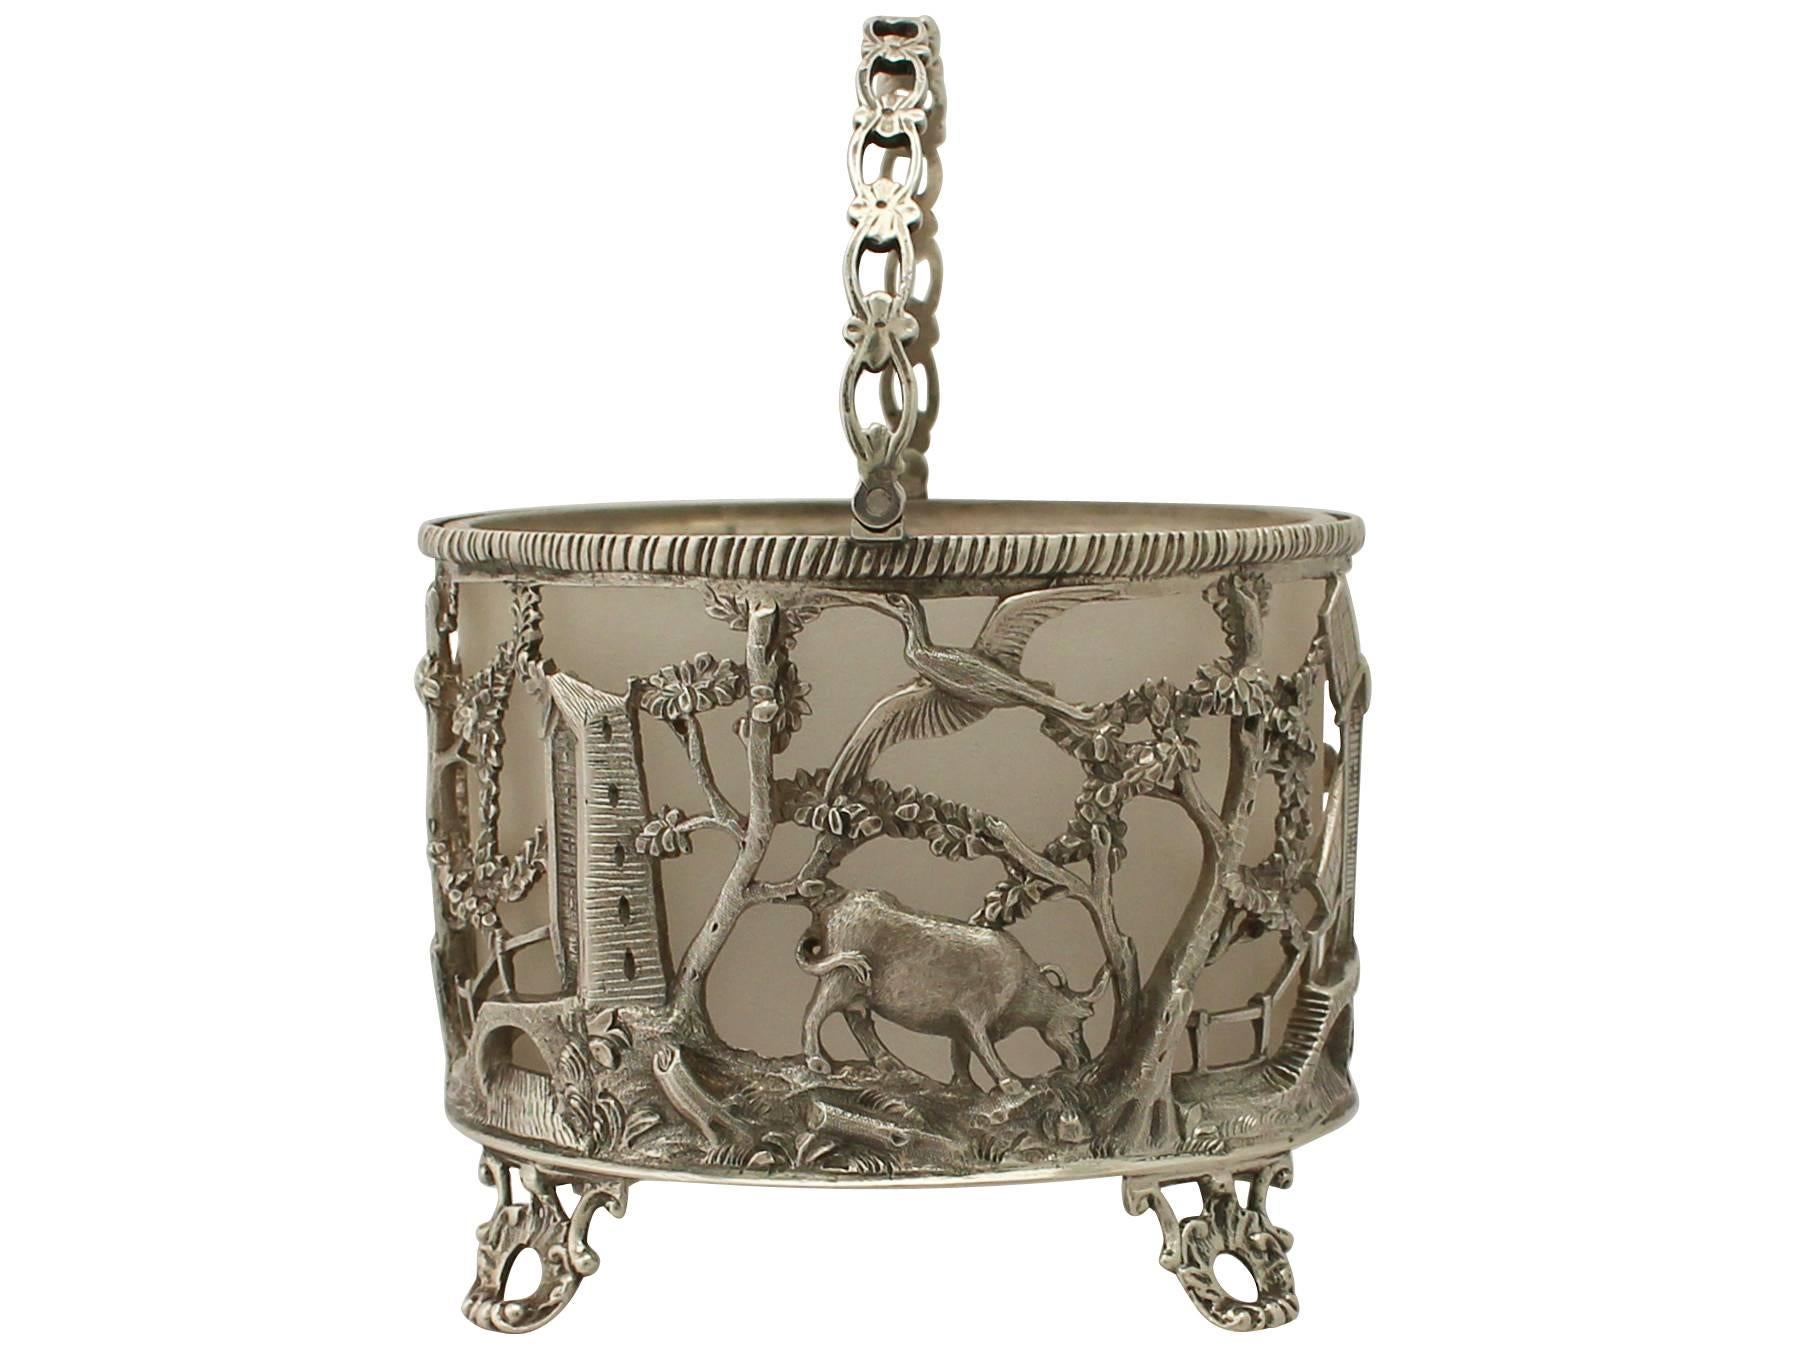 An exceptional, fine and impressive antique Victorian English sterling silver sugar basket; an addition to our silver teaware collection.

This exceptional antique sterling silver basket has a cylindrical shaped form onto four bracket style